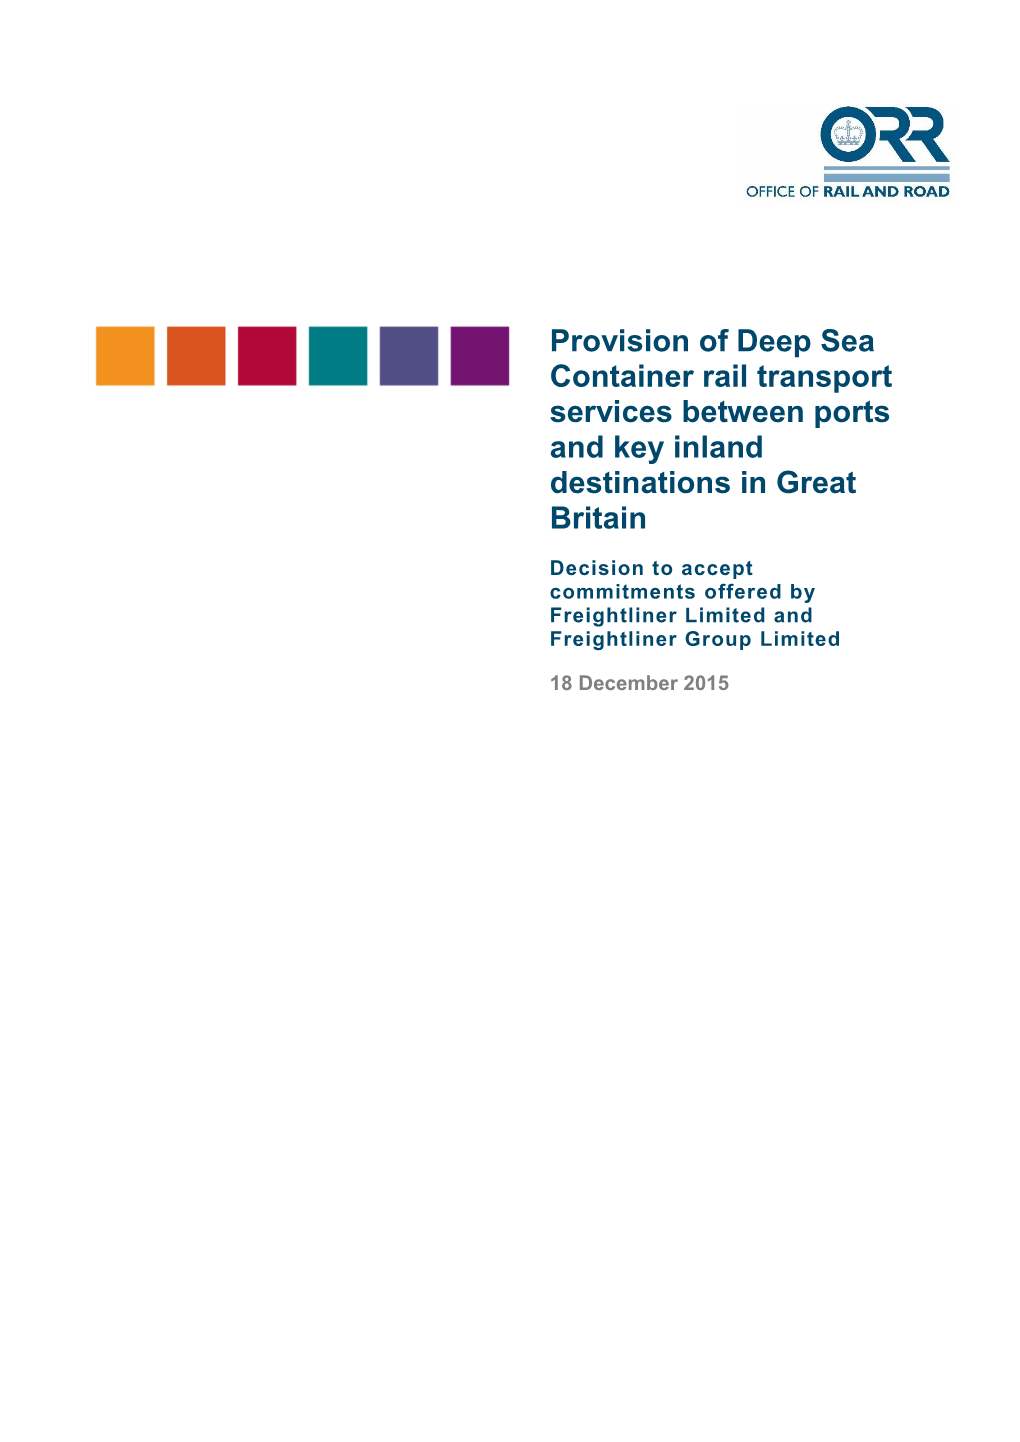 Provision of Deep Sea Container Rail Transport Services Between Ports and Key Inland Destinations in Great Britain